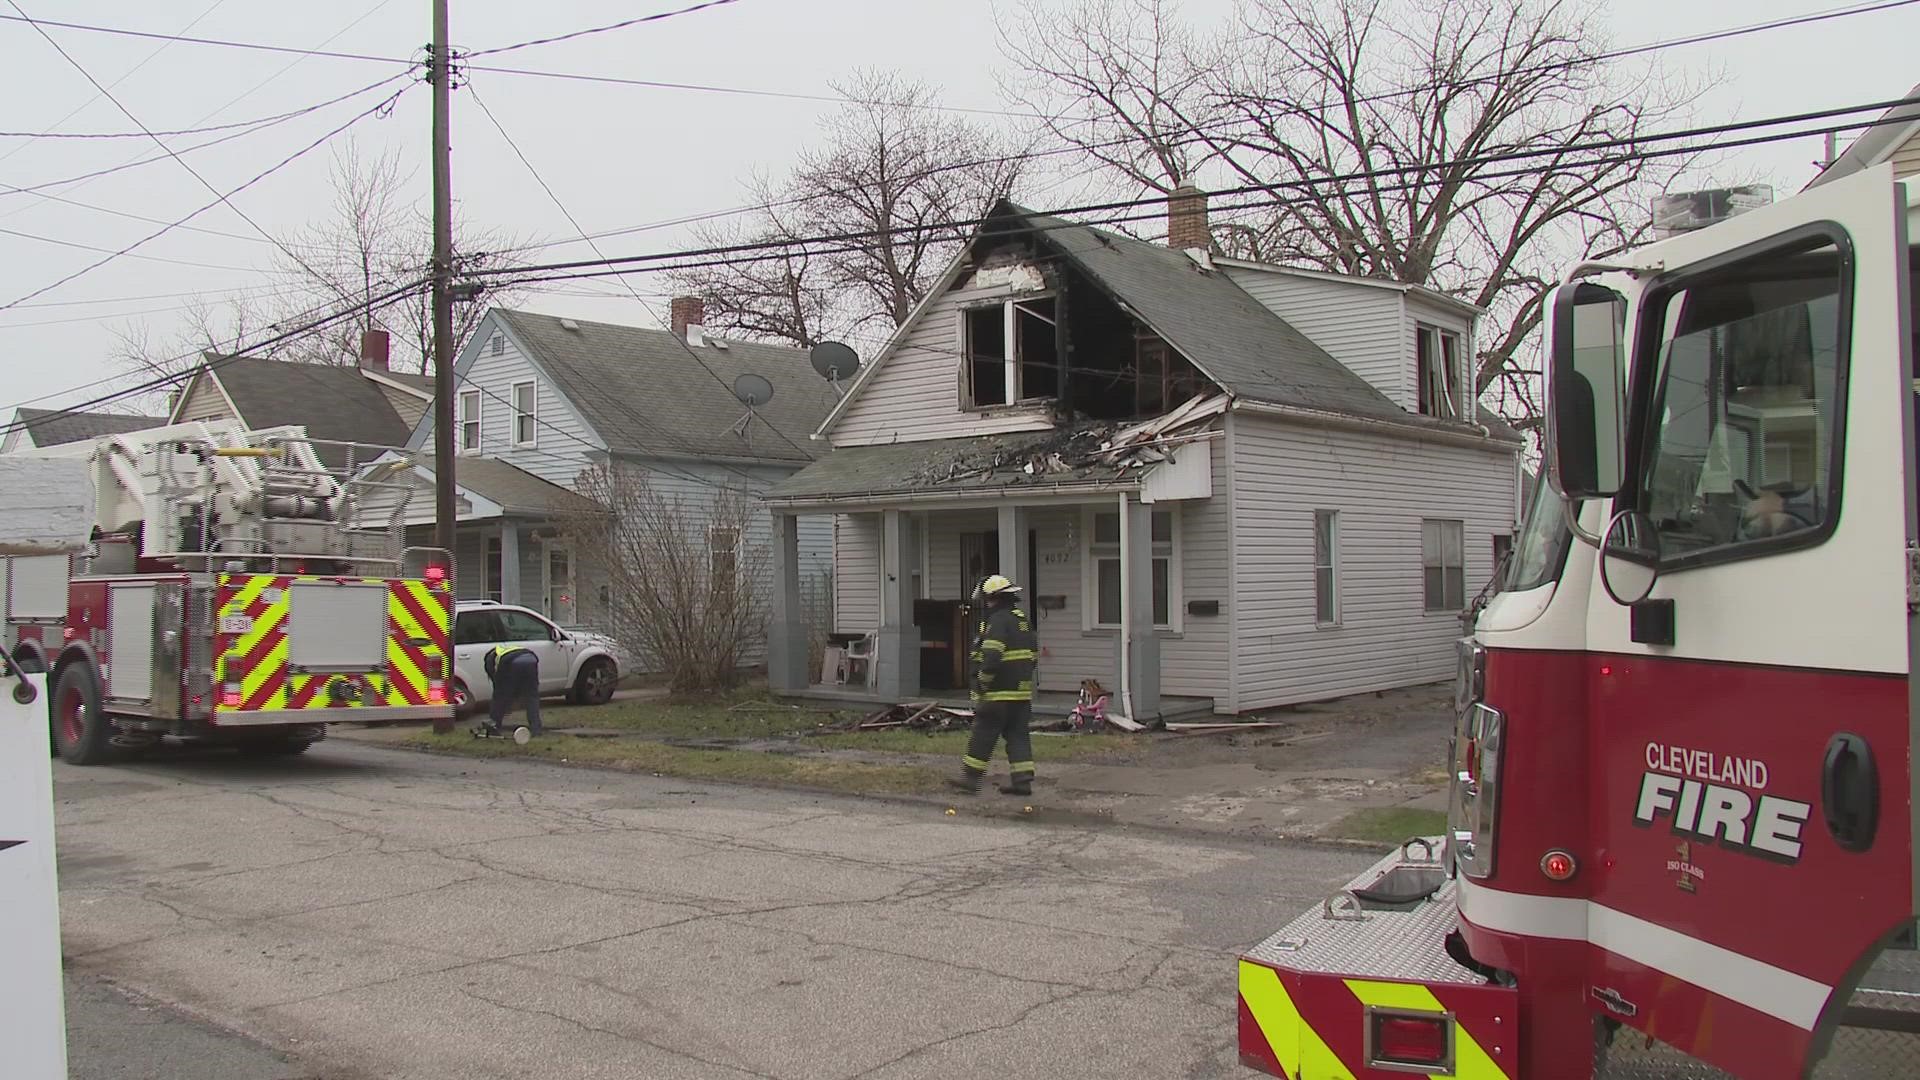 Authorities tell 3News a space heater is most likely the cause of a Friday morning house fire in the 4000 block of East 56th Street in Cleveland.